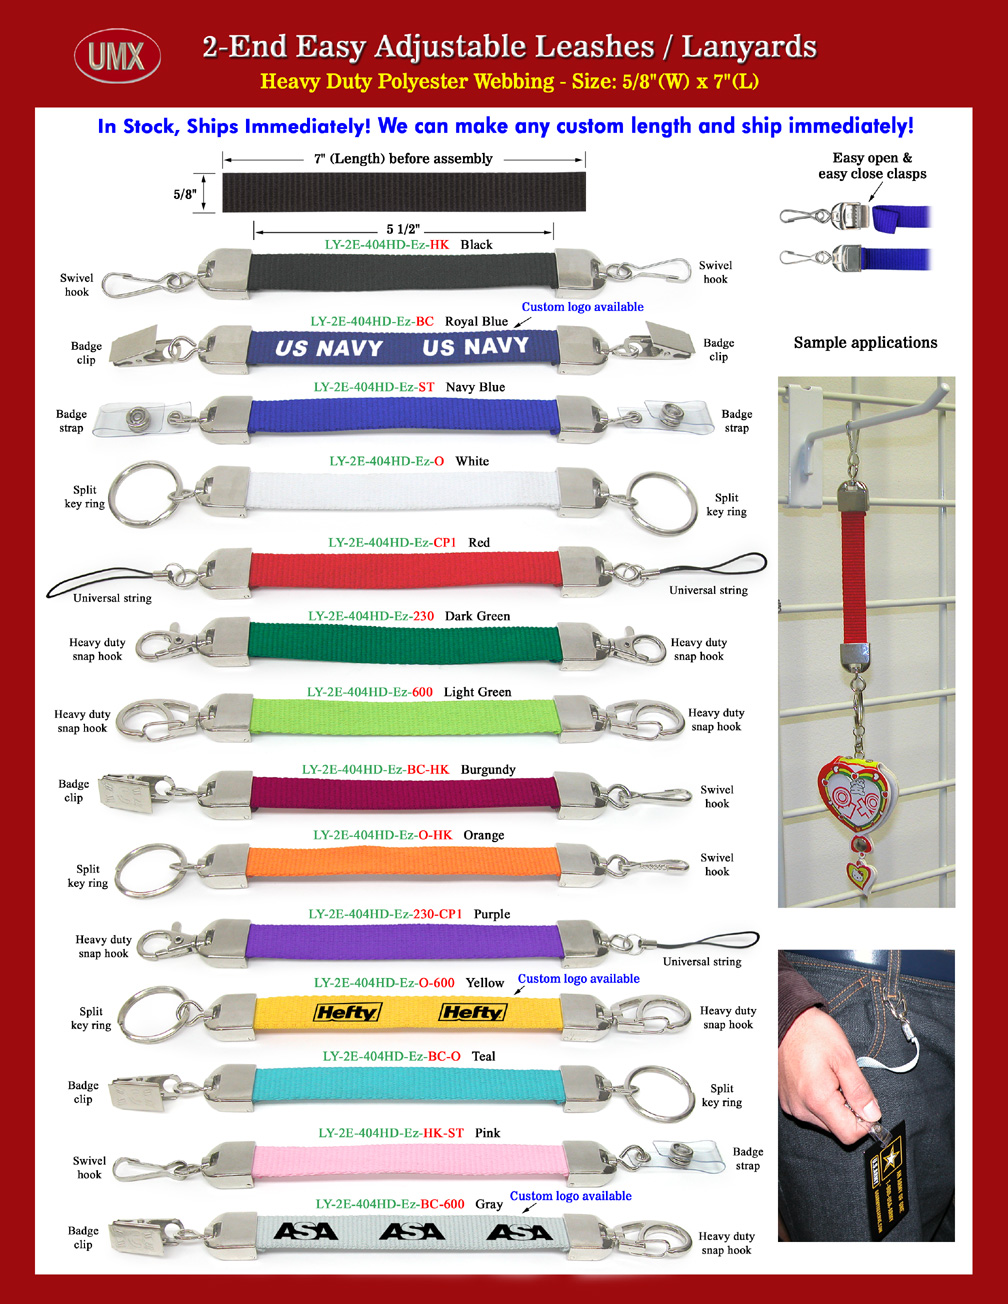 The great designed 5/8" Ez-Adjustable plain color double-end Leashes/2-end lanyards come with 5/8" heavy duty polyester straps. 